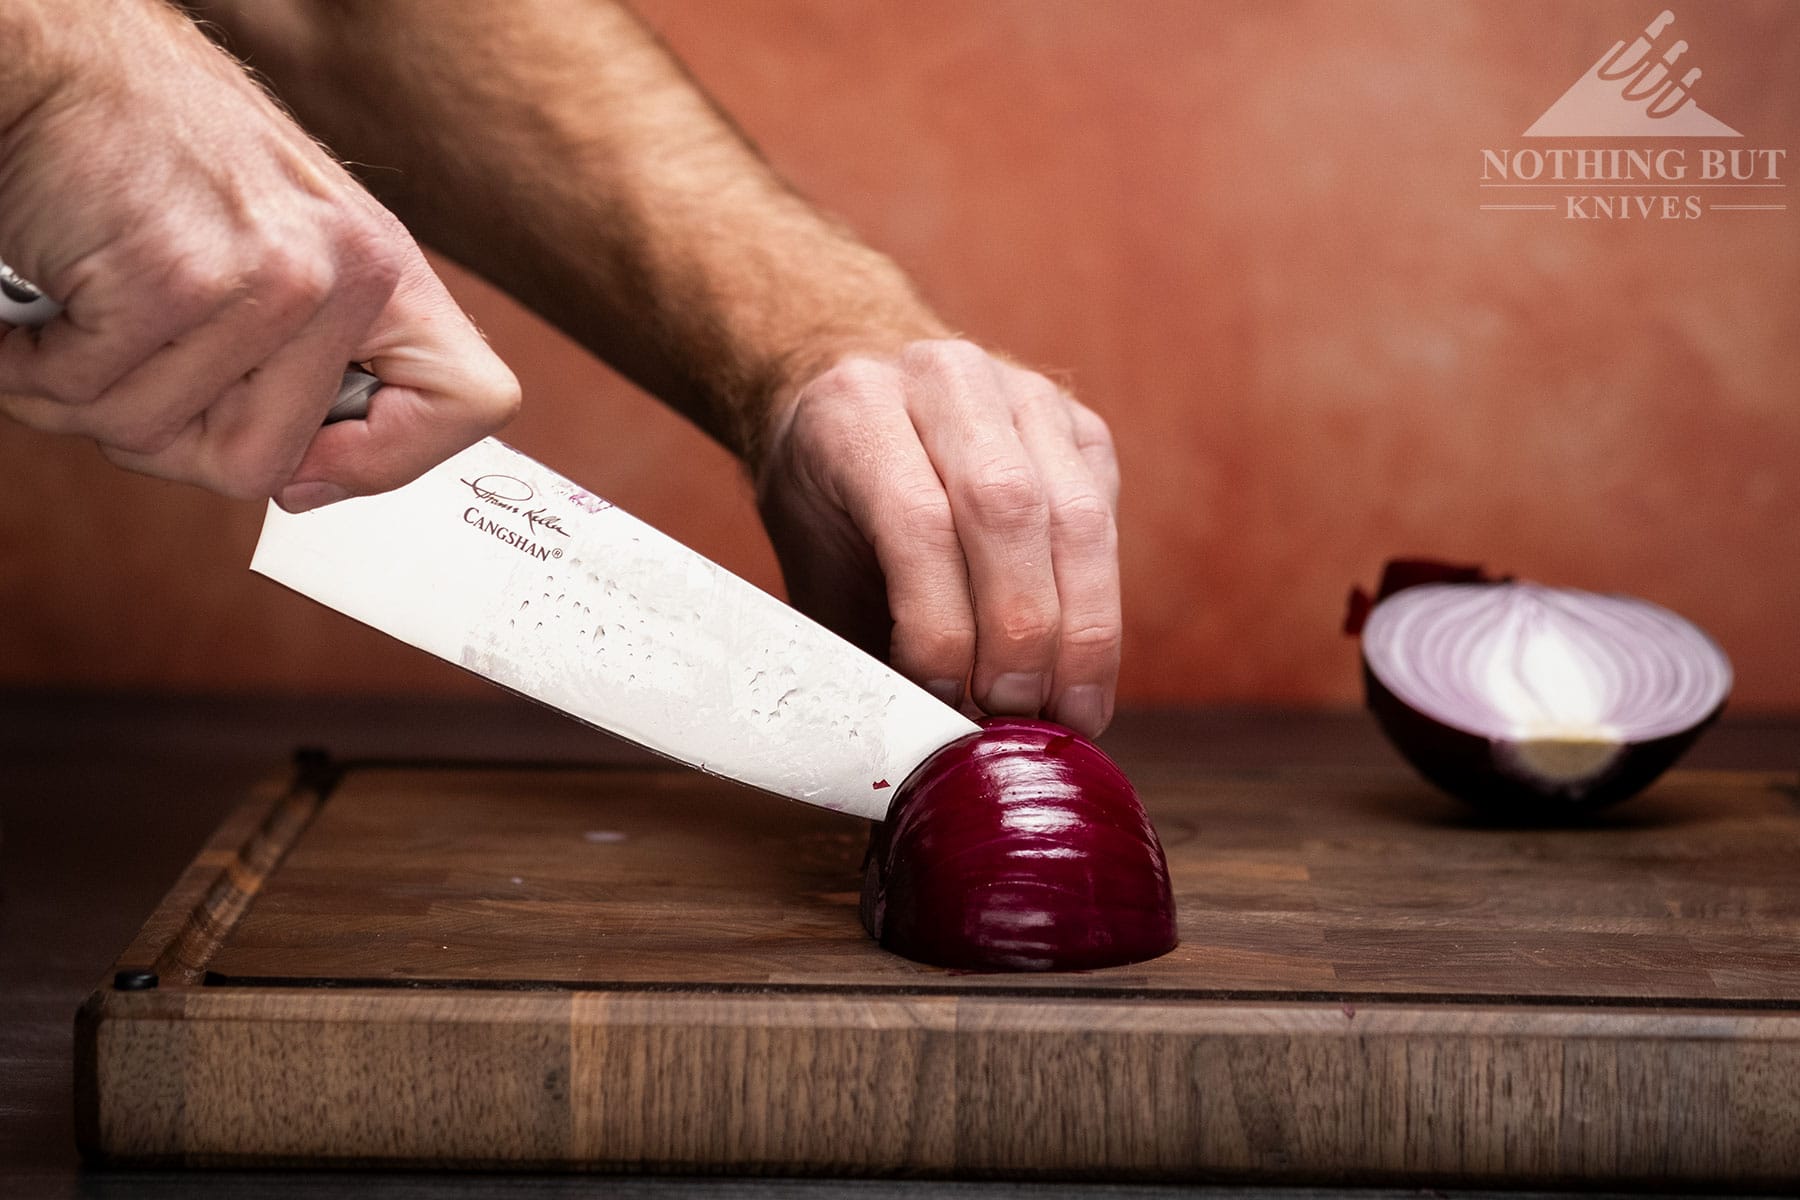 The Cangshan Thomas Keller chef knife being used to make small slices in a red onion on a wood cutting board.